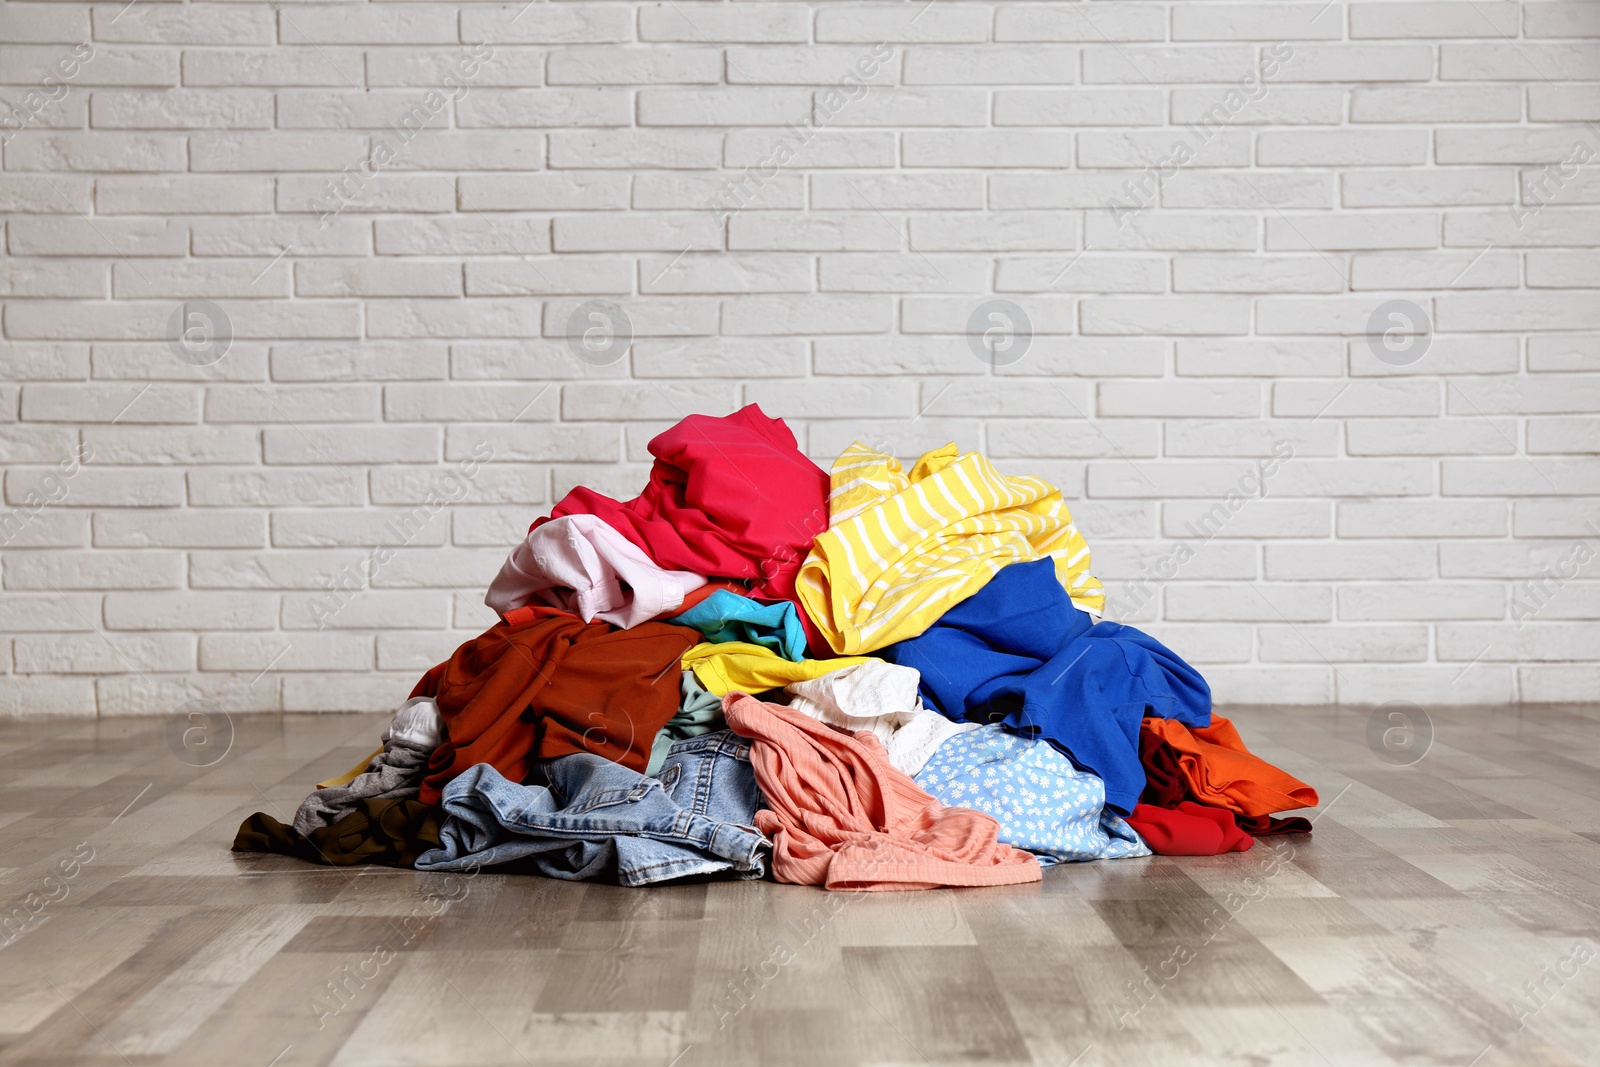 Photo of Pile of dirty clothes on floor near brick wall